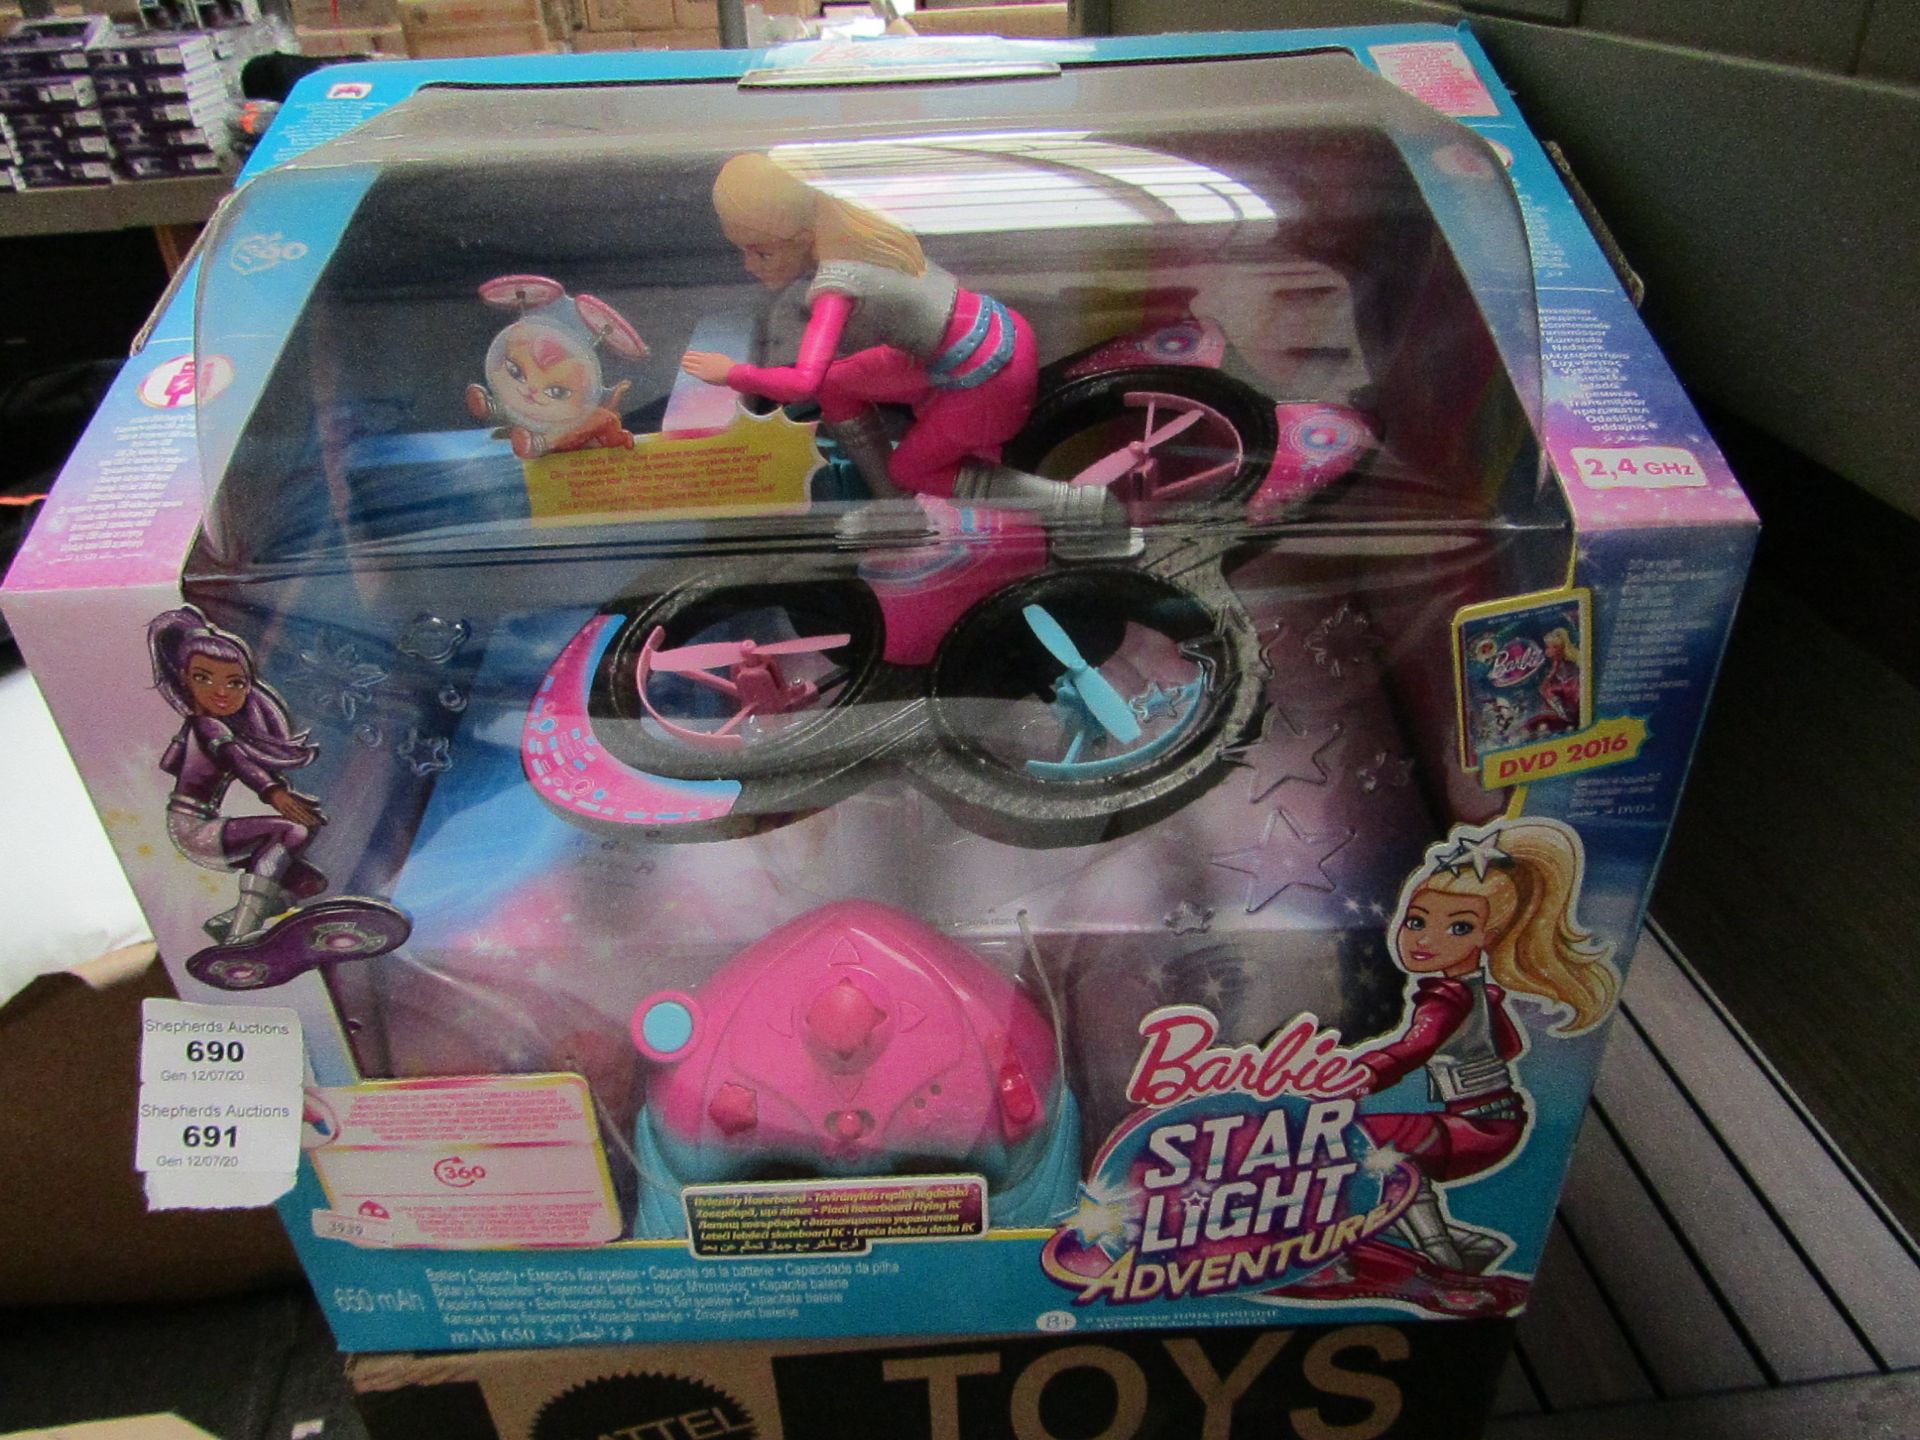 Barbie star light adventure, new and boxed.